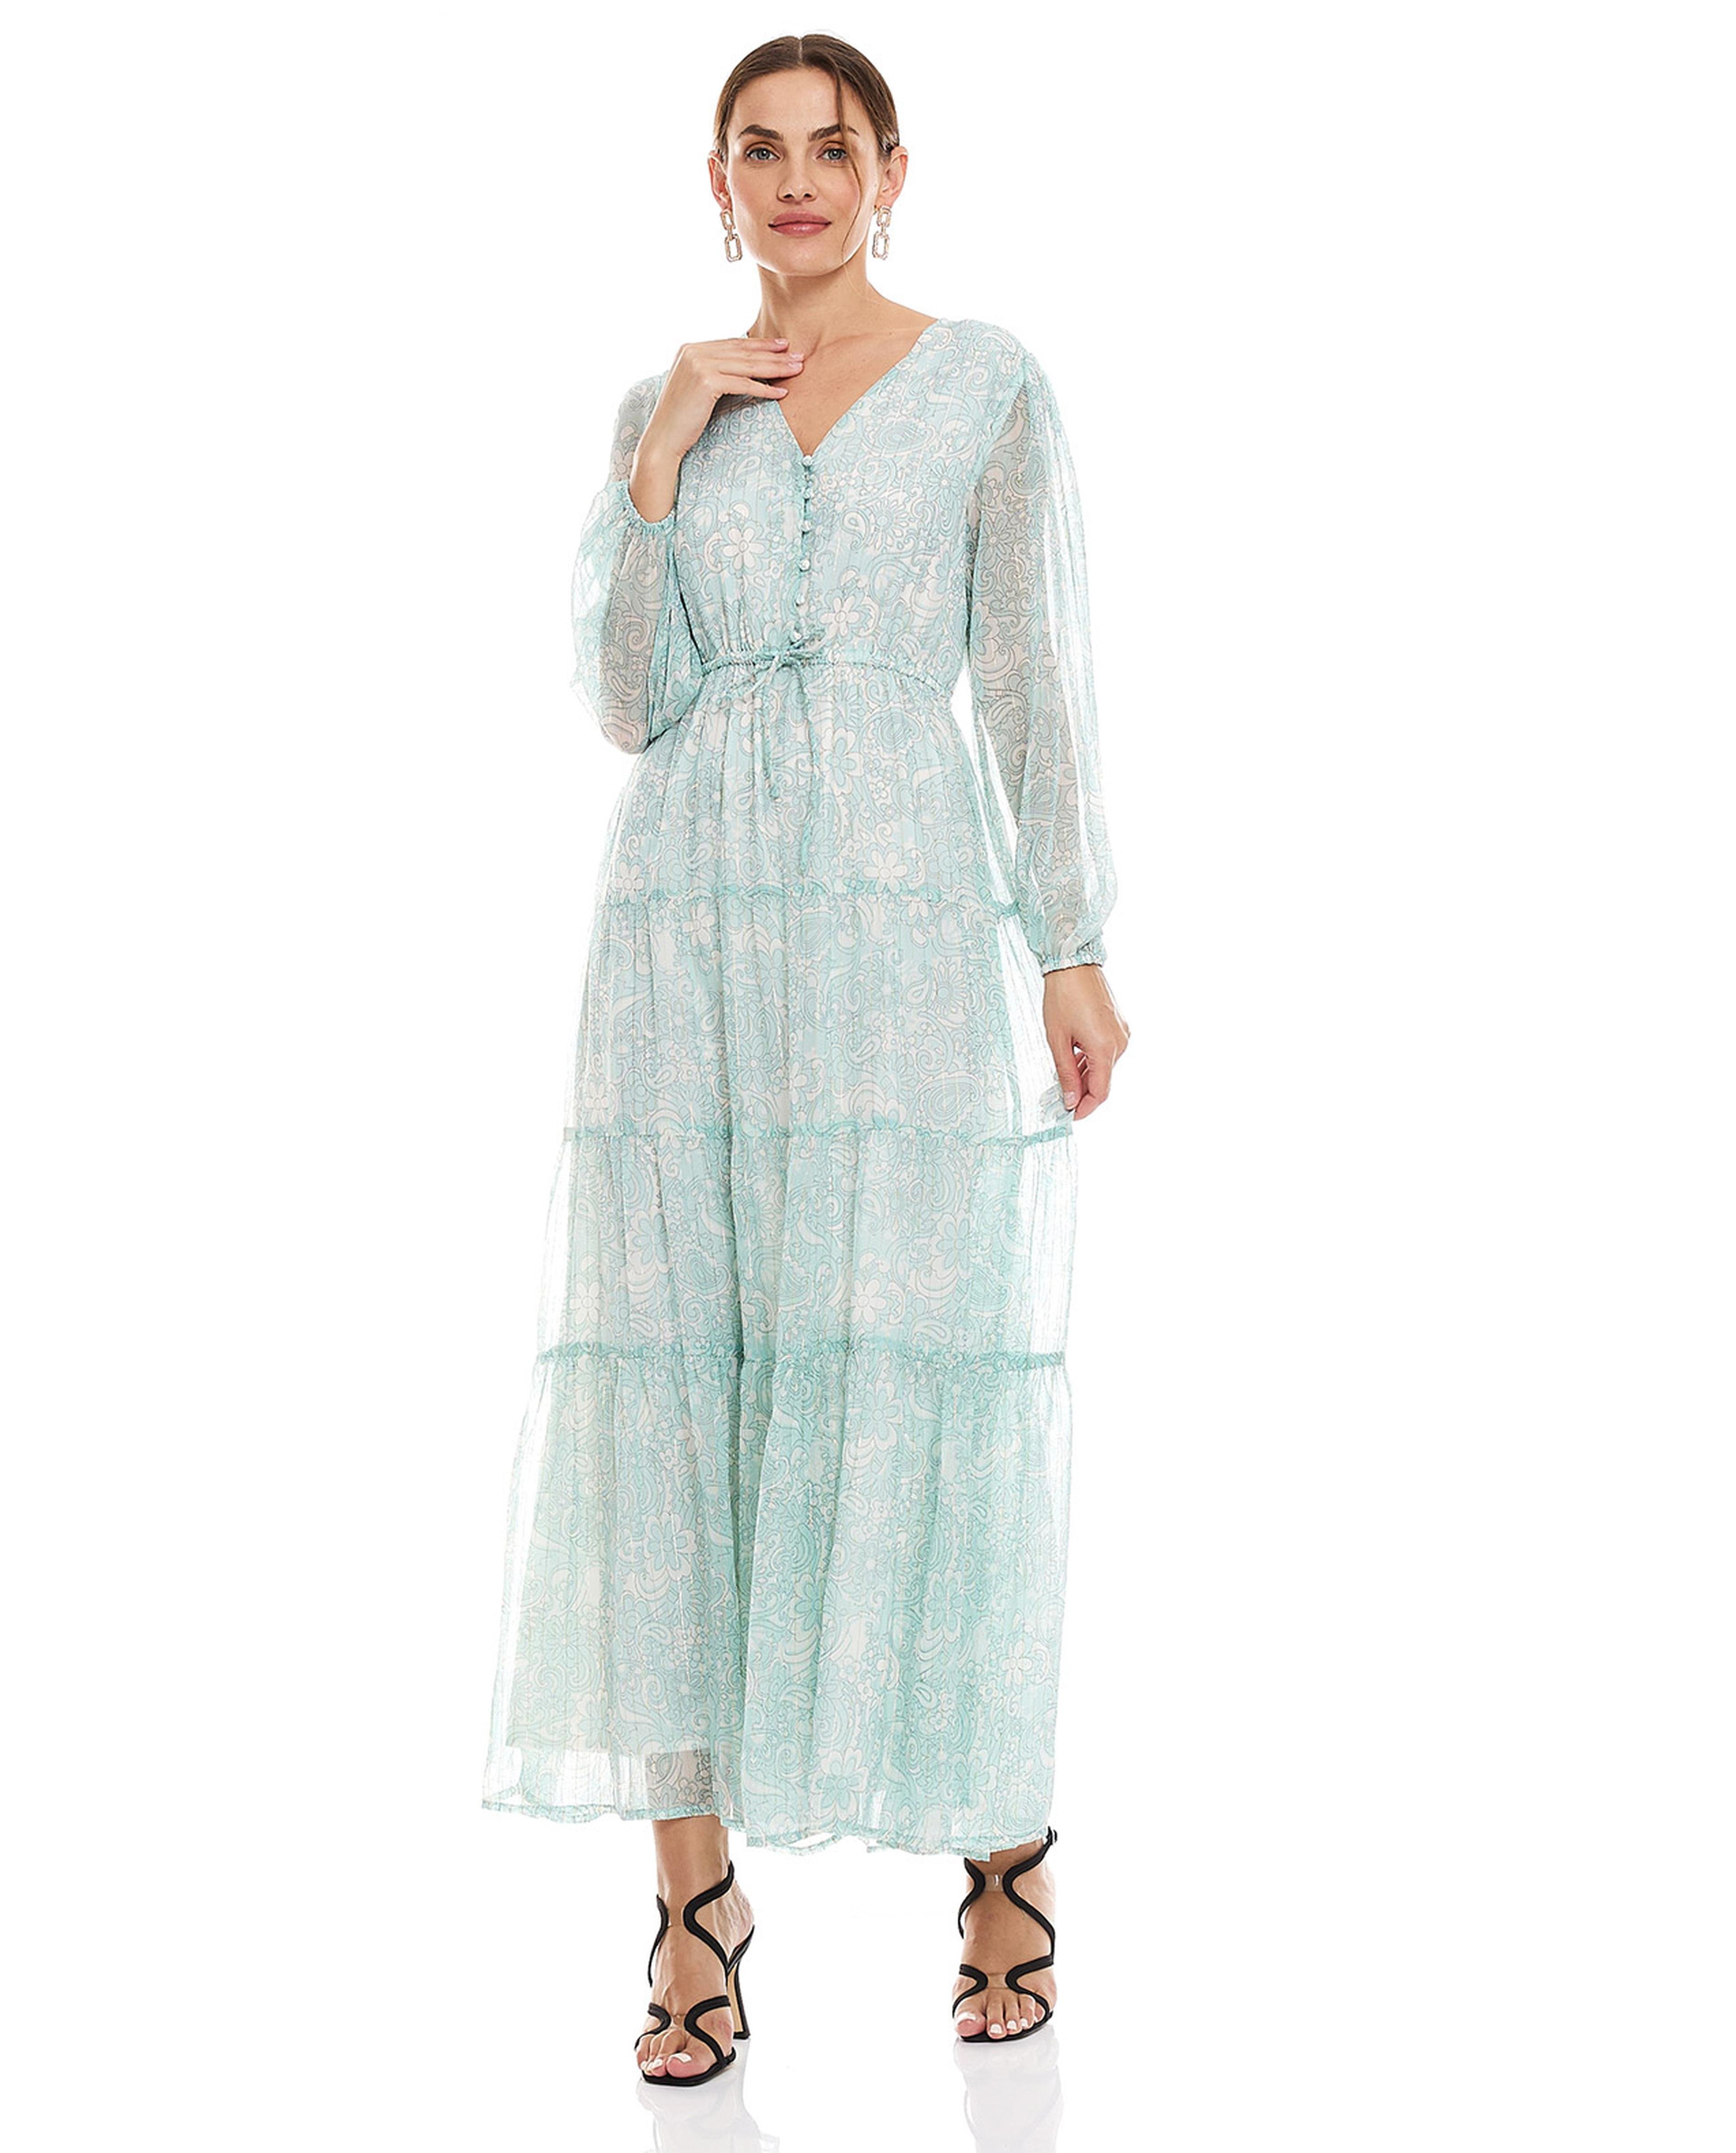 Printed Maxi Dress with V-Neck and Long Sleeves